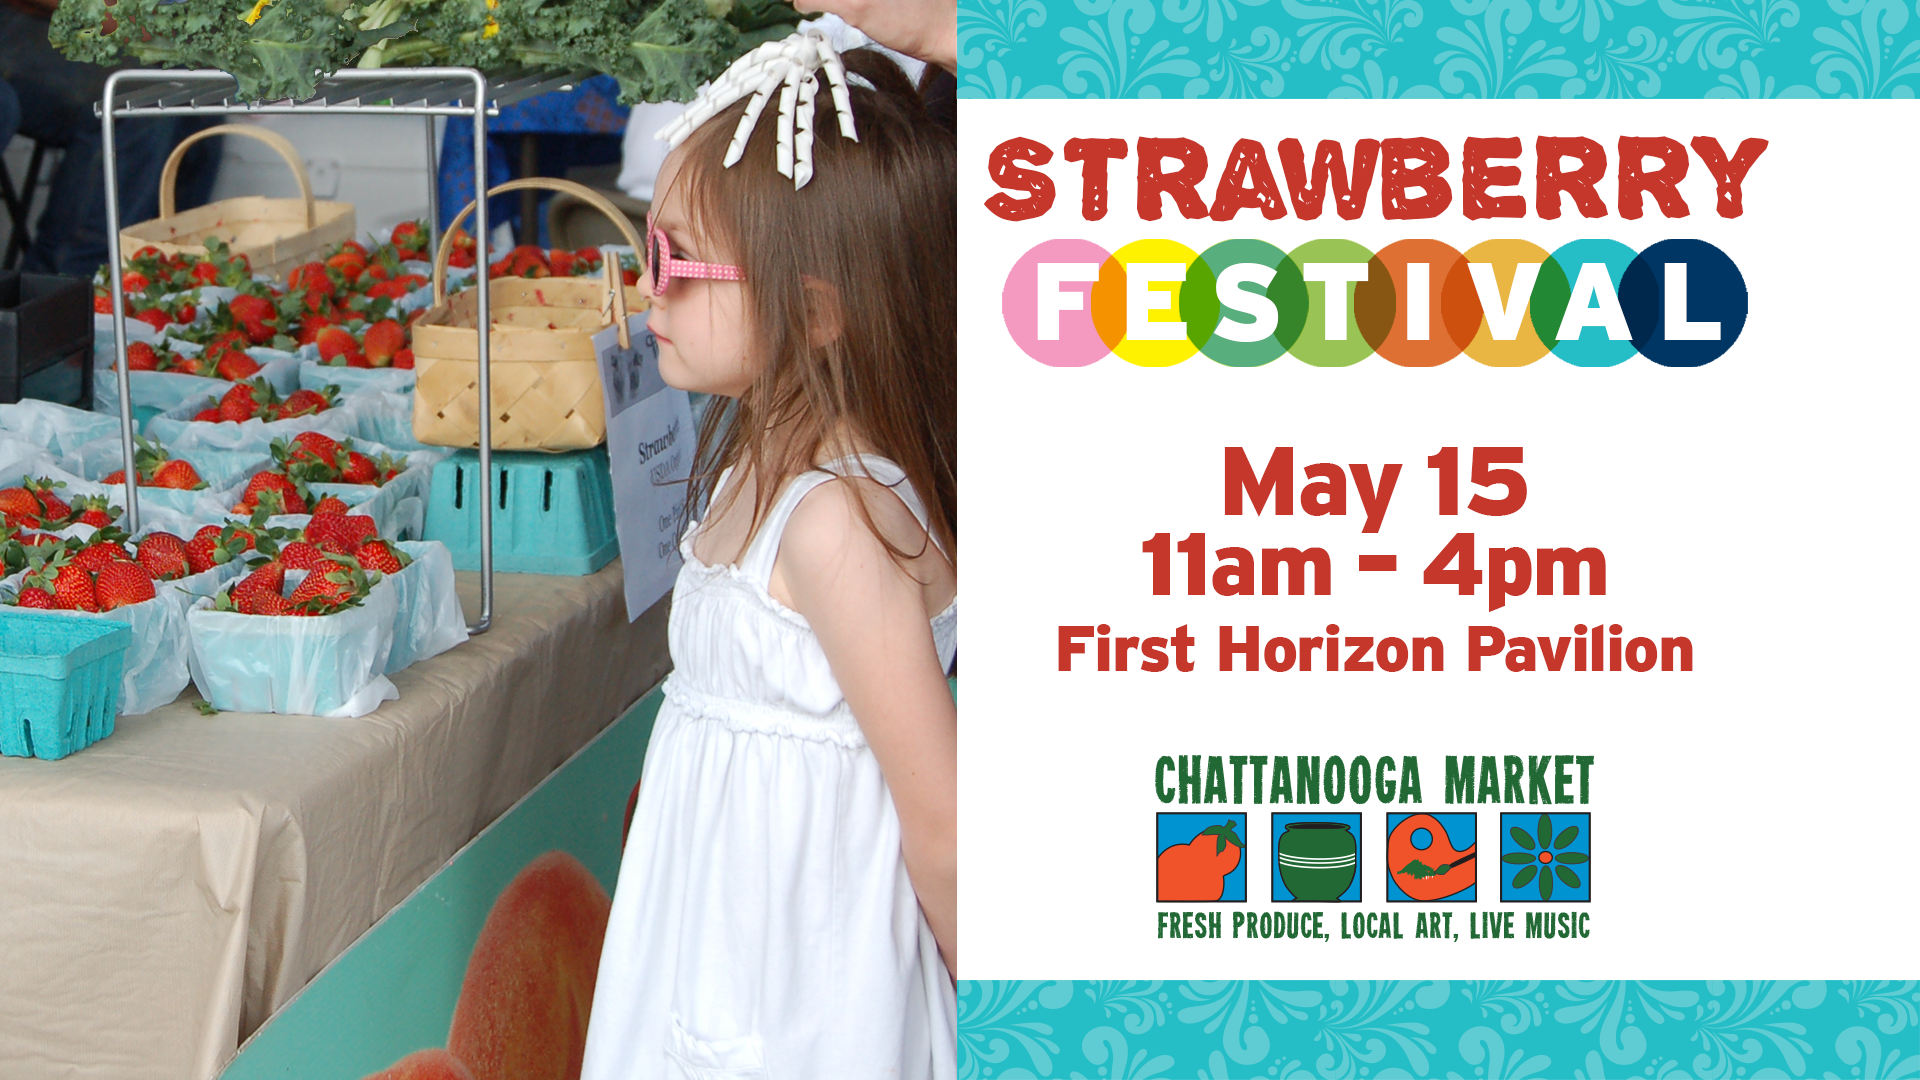 Strawberry Festival: May 15